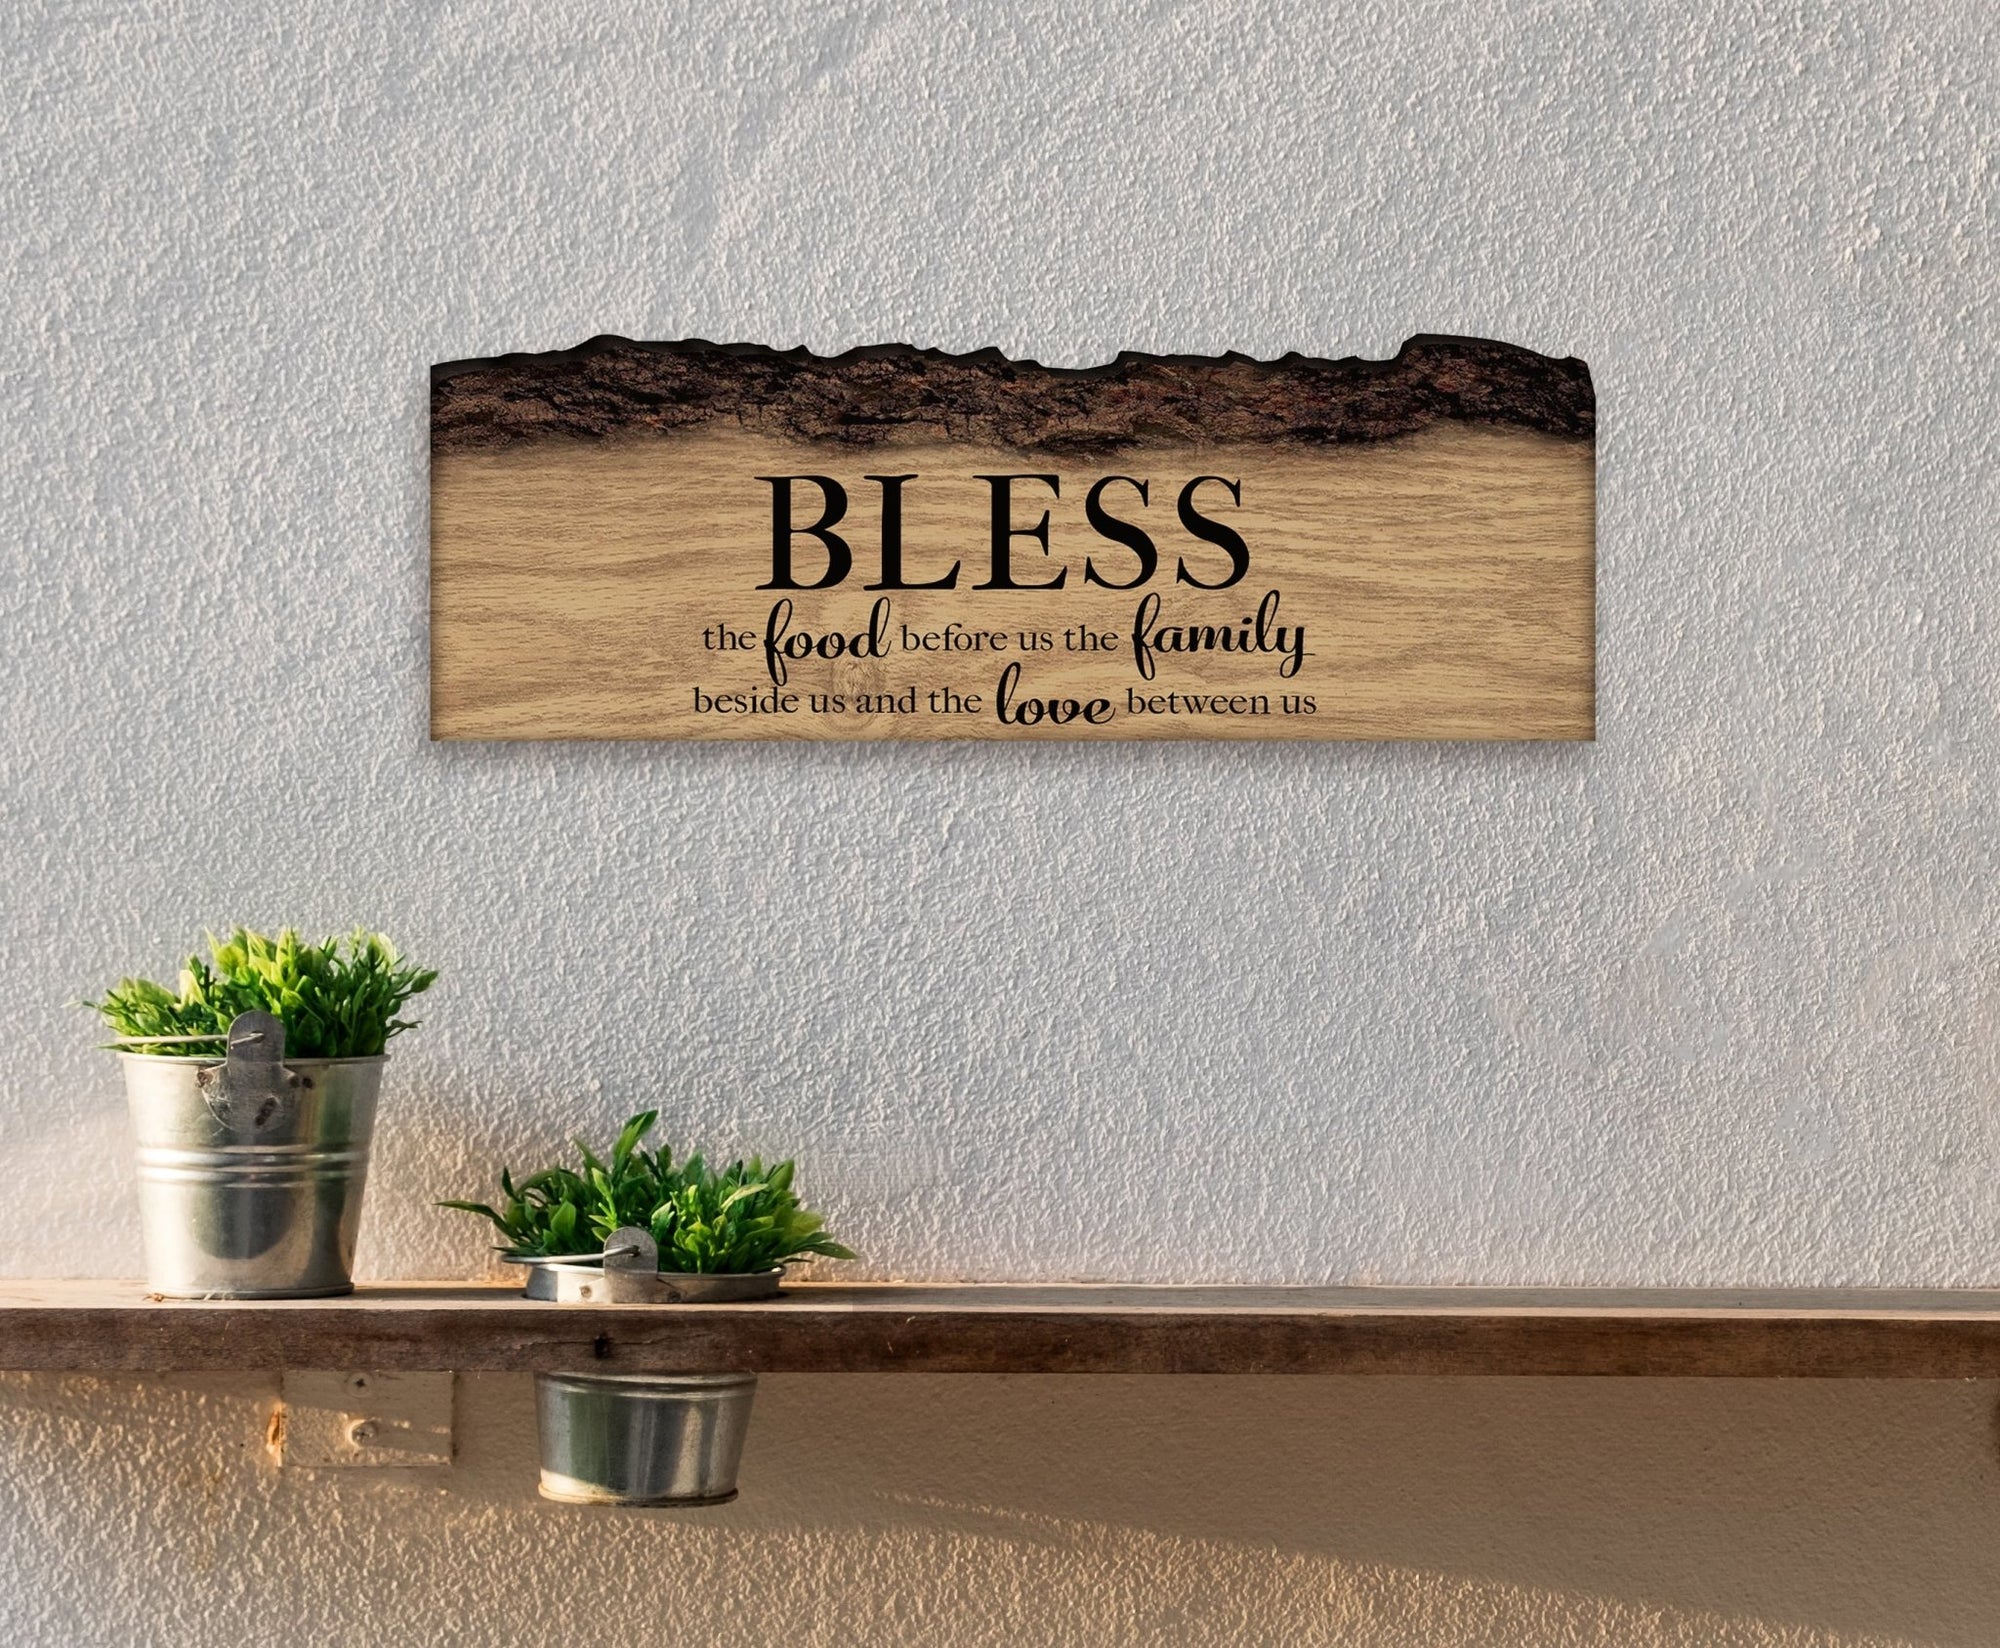 Digitally Printed Barky Wood Plaque 16x6 - Bless The Food - LifeSong Milestones